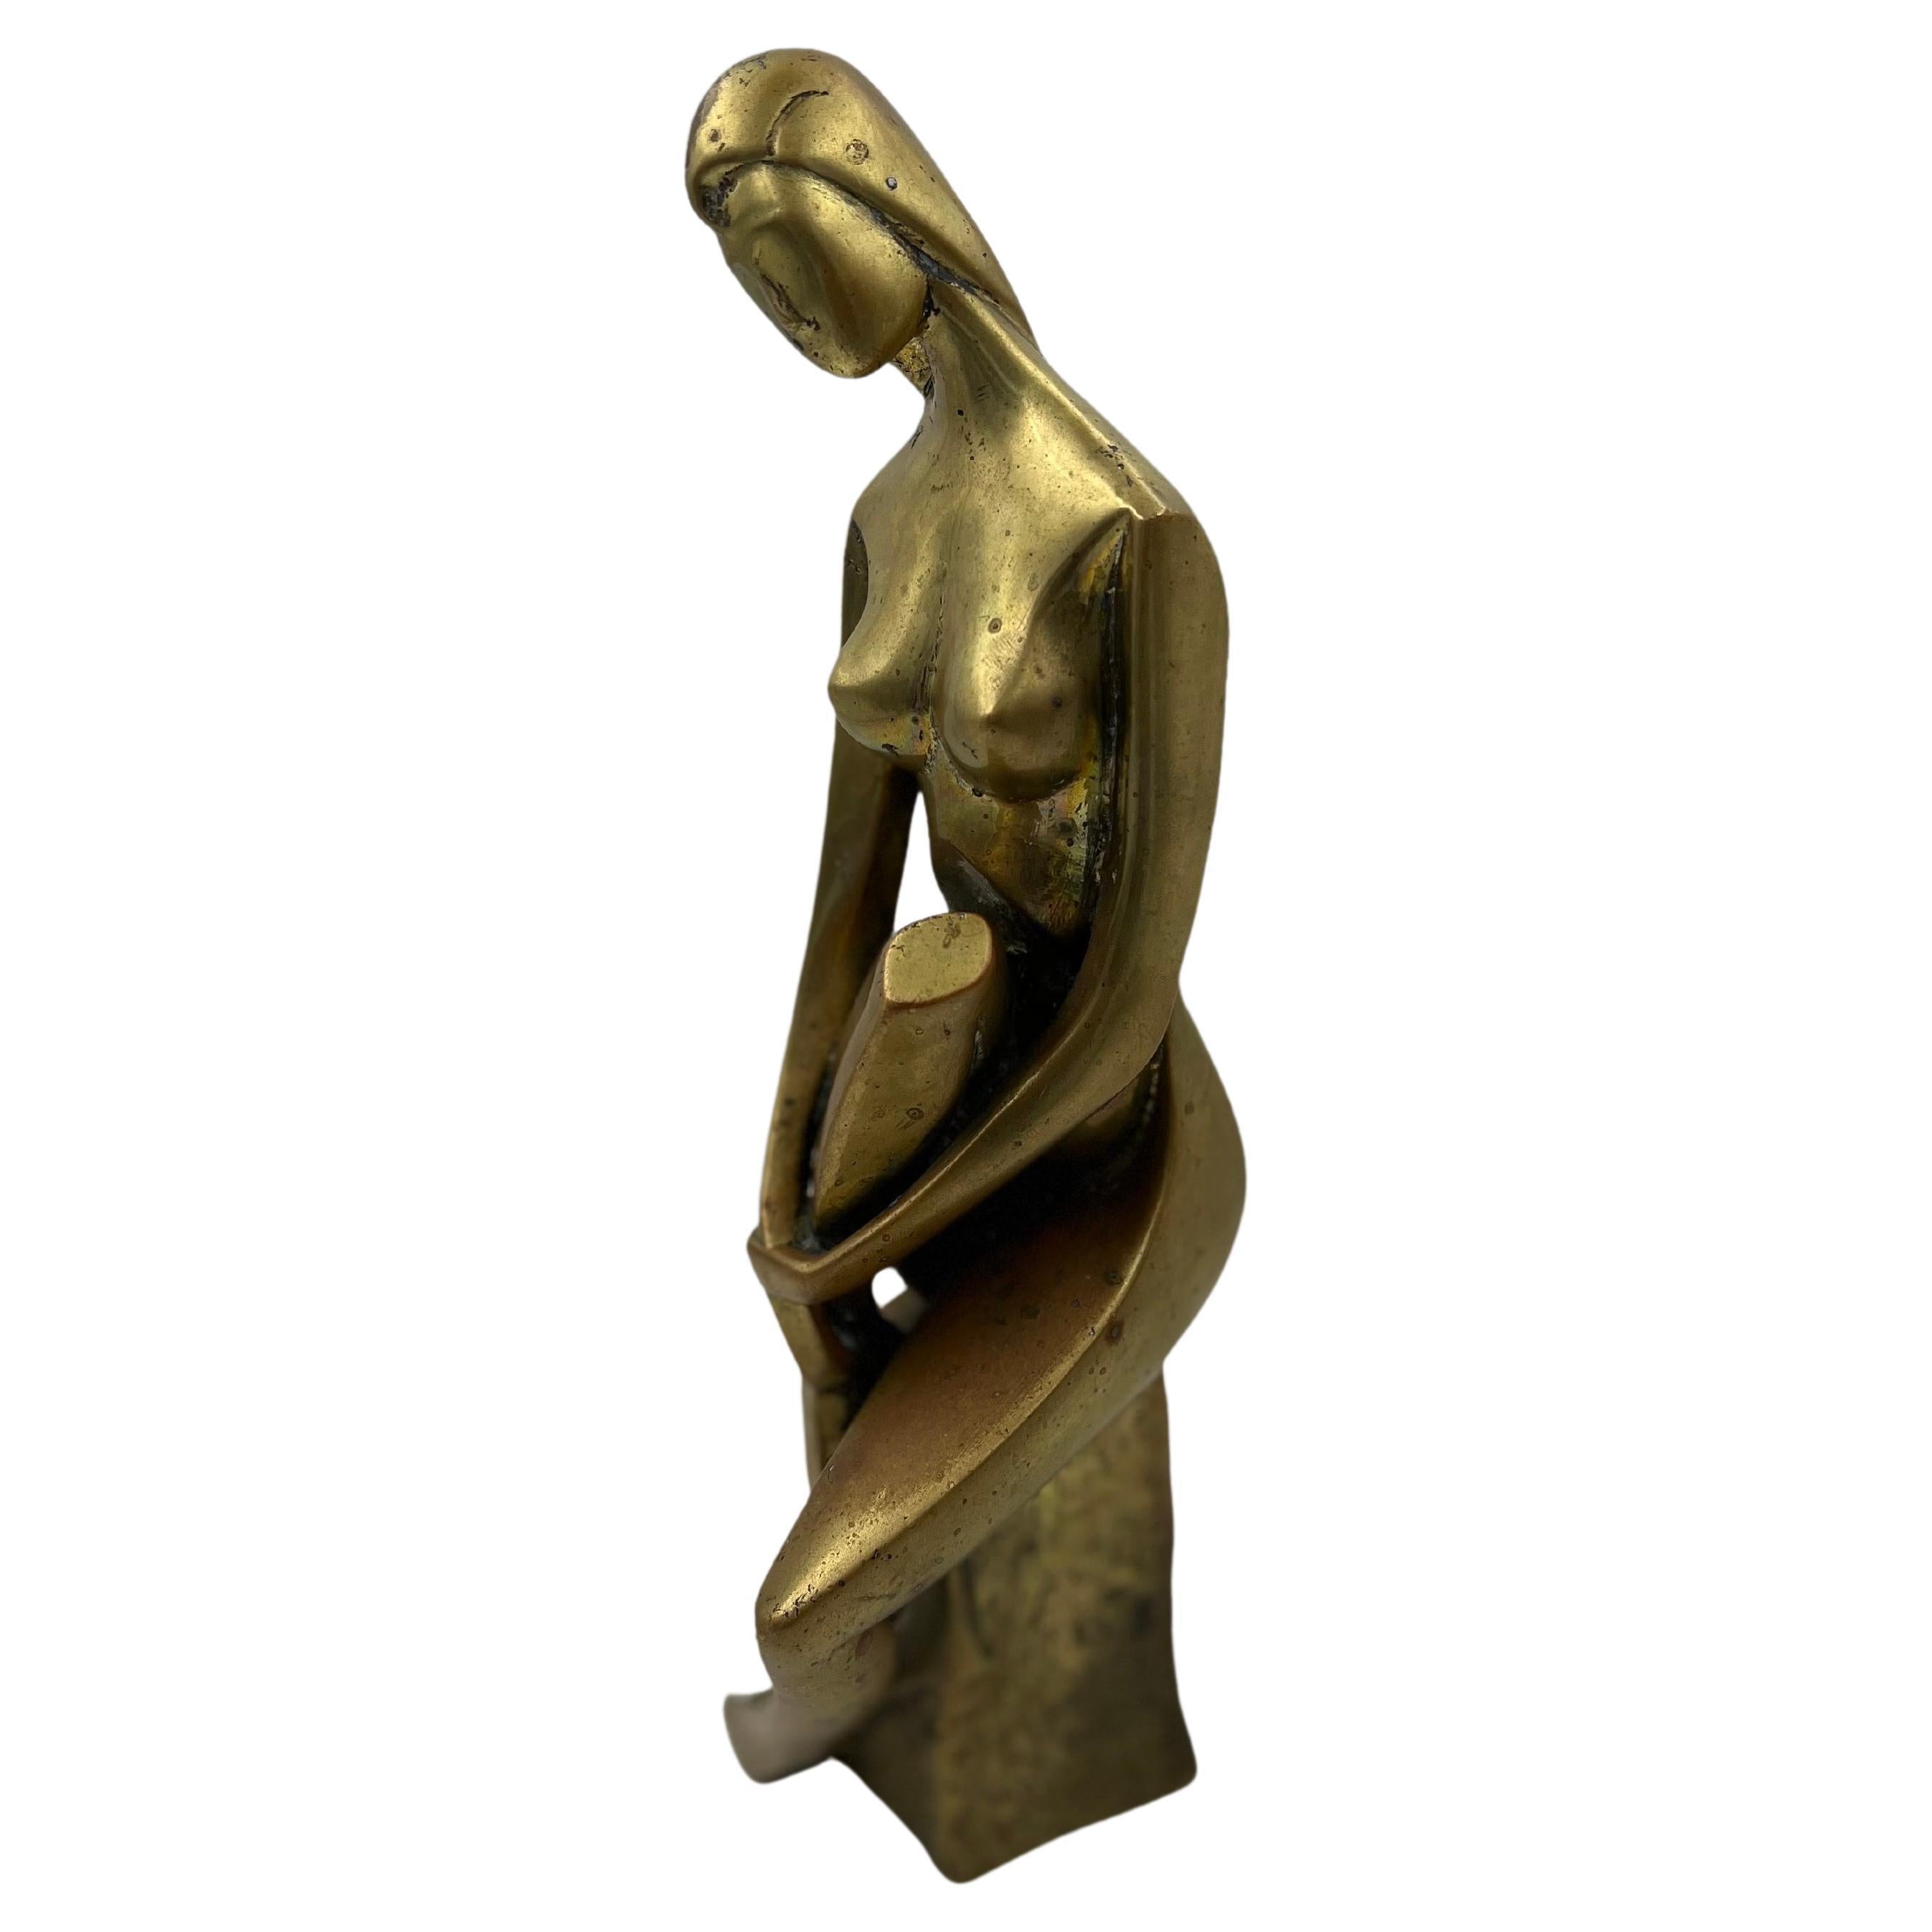 A very attractive vintage art deco bronze nude sculpture, circa 1940s.  The piece is in good condition and measures 3